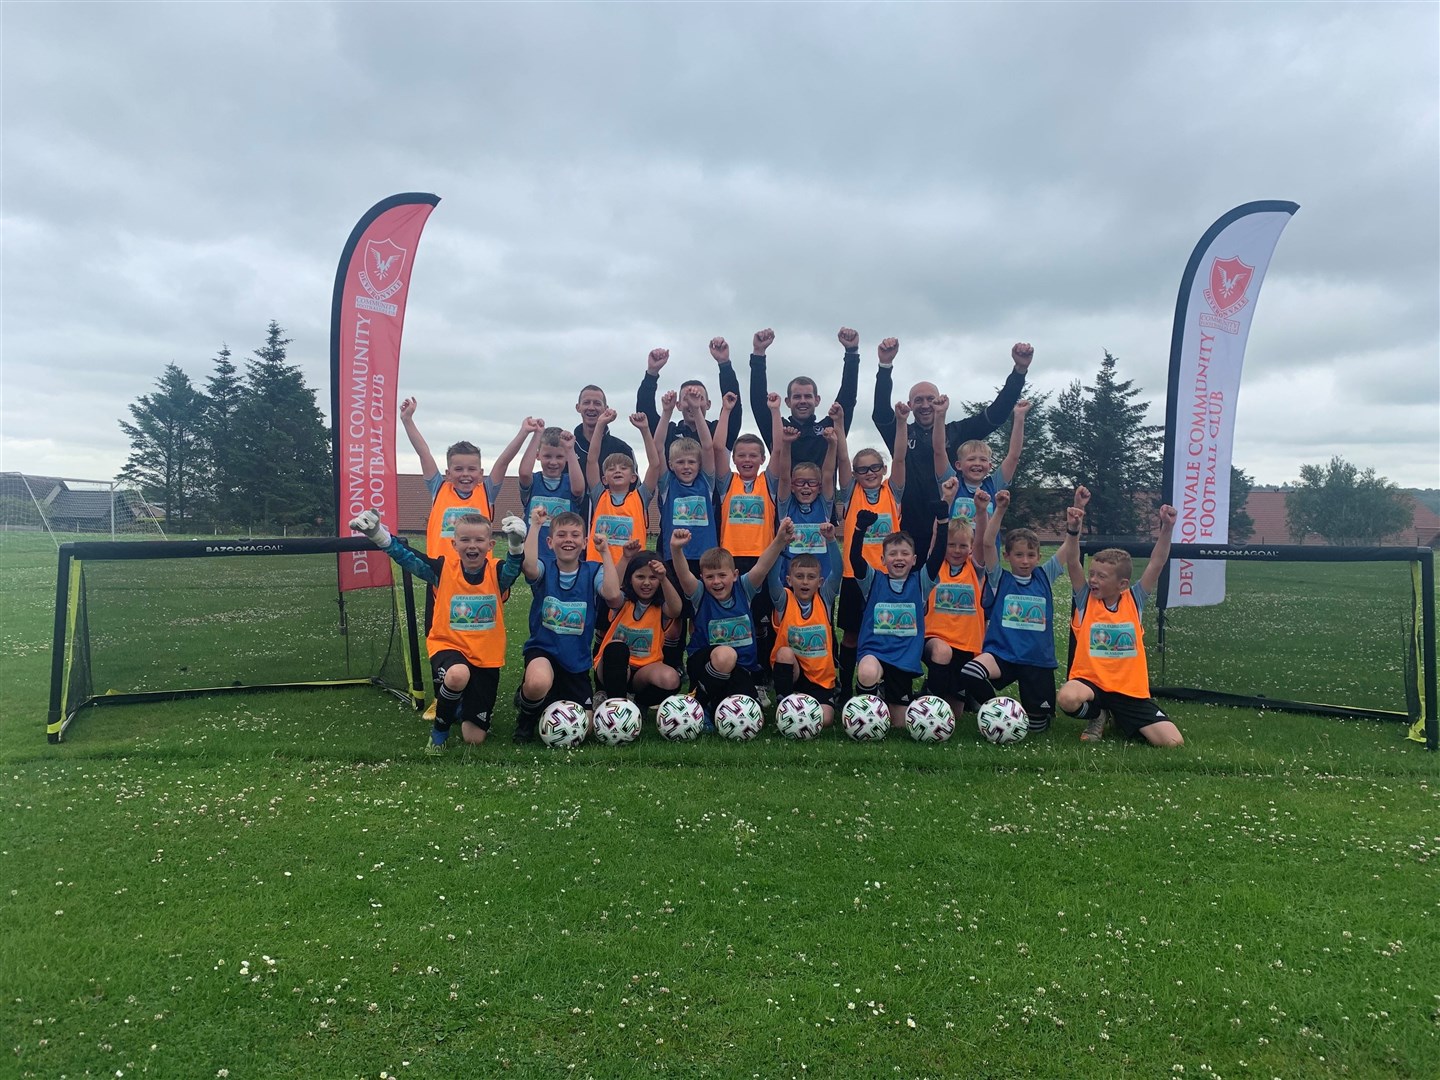 Deveronvale Community Football Club youngsters celebrate their EURO 2020 legacy award.